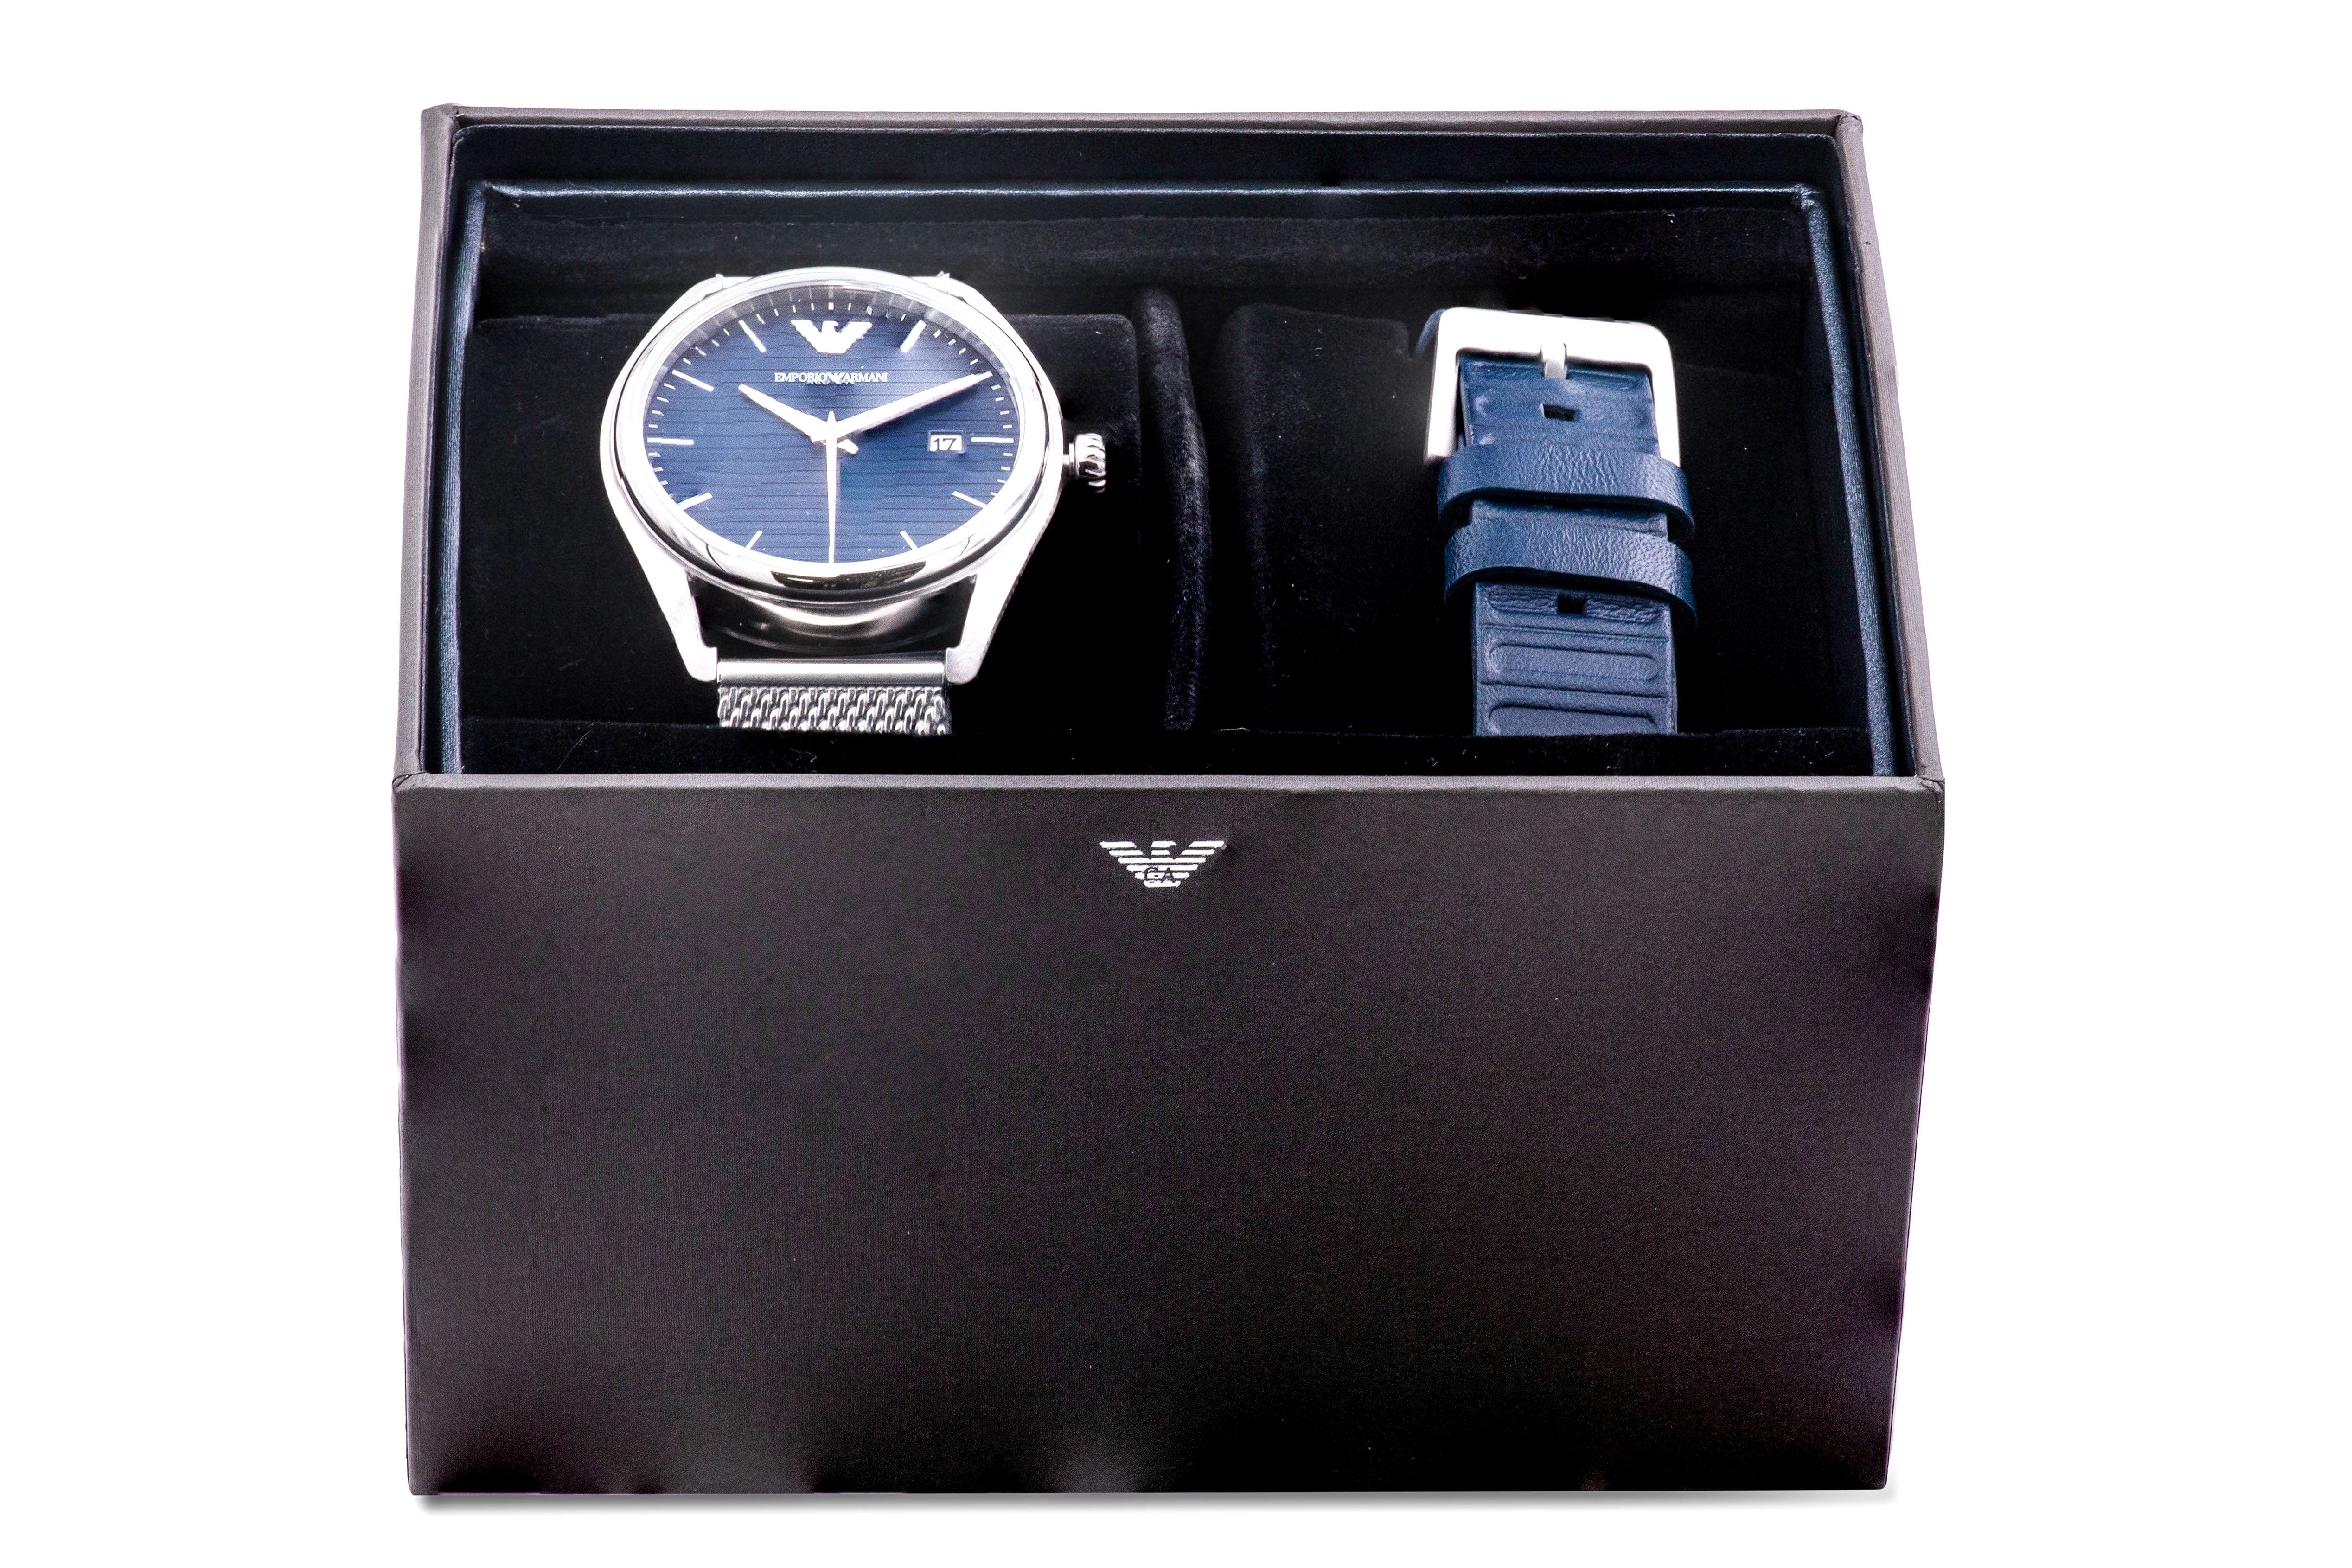 Details more than 75 armani gift set watch best